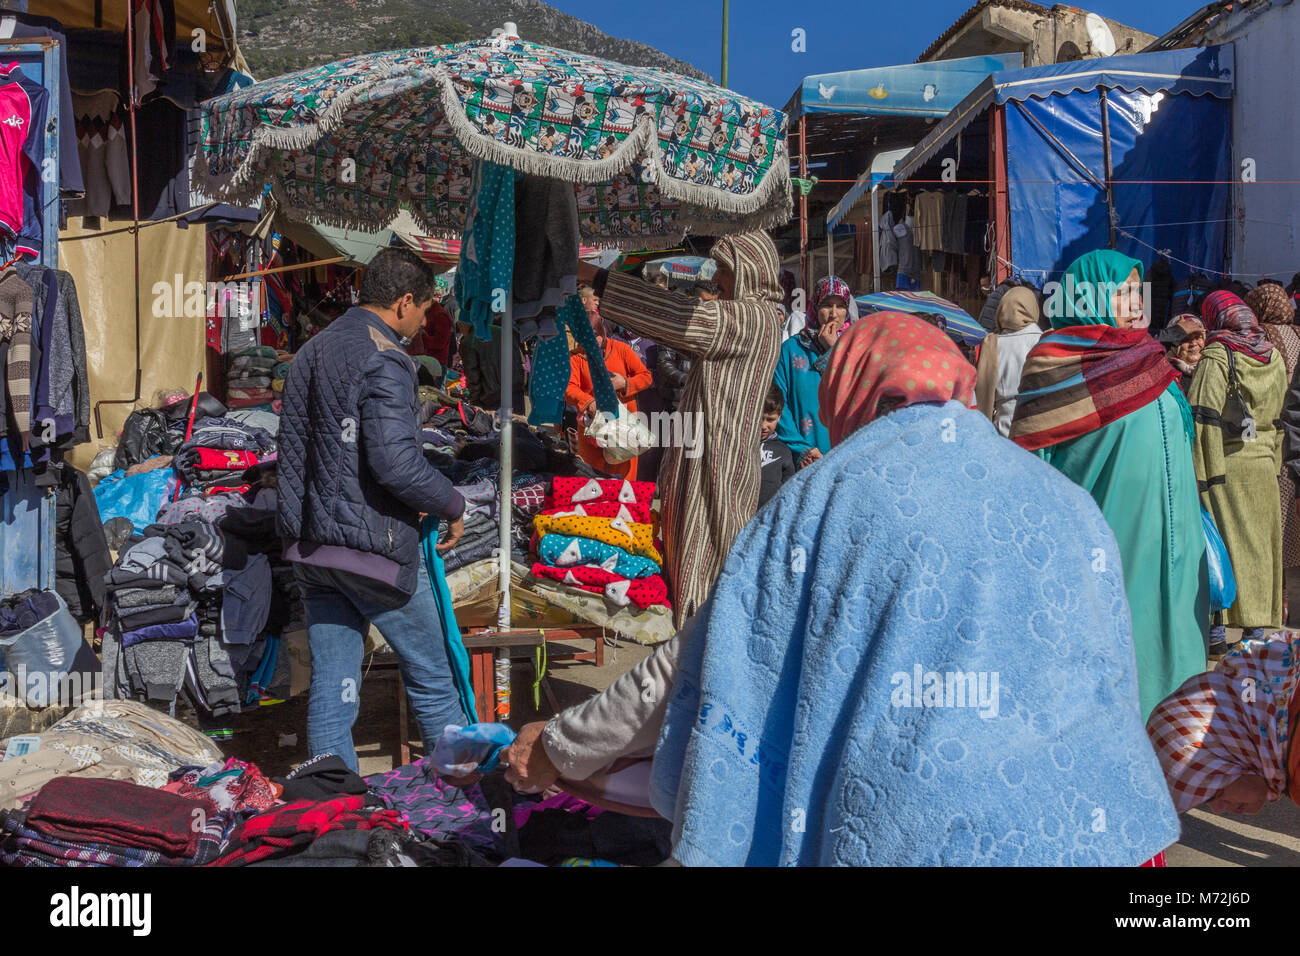 A busy vibrant street scene showing local people at the regular market on market day in Chefchaouen, Morocco Stock Photo